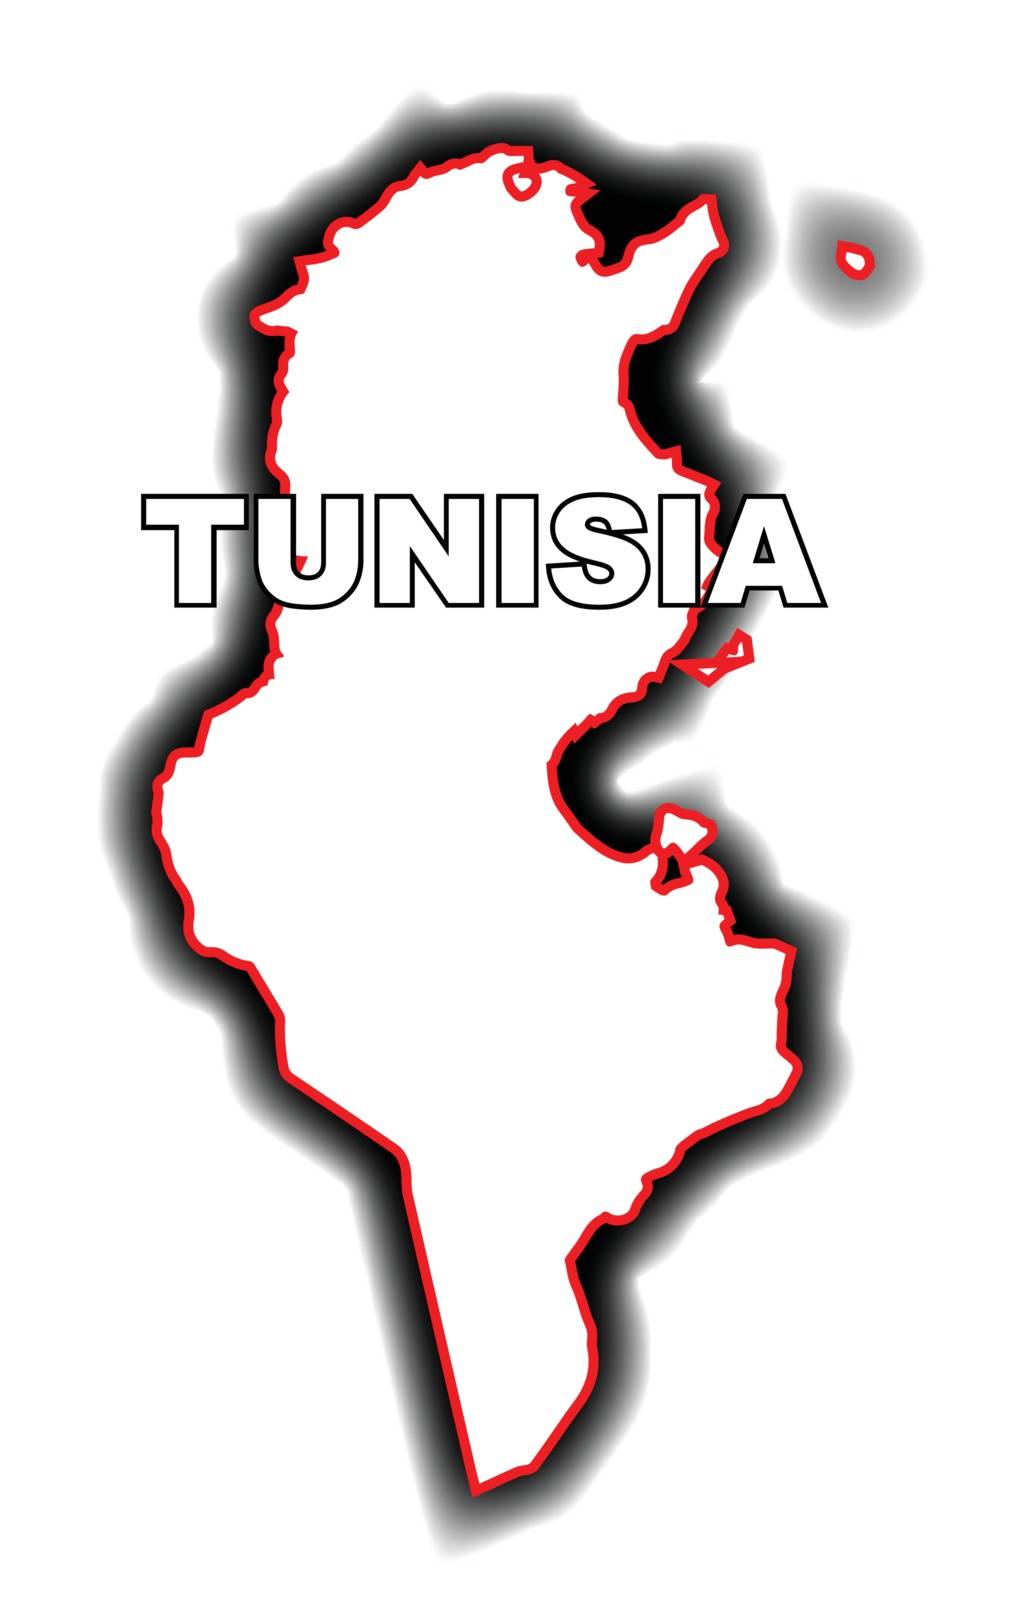 Outline map of the Arab League country of Tunisia